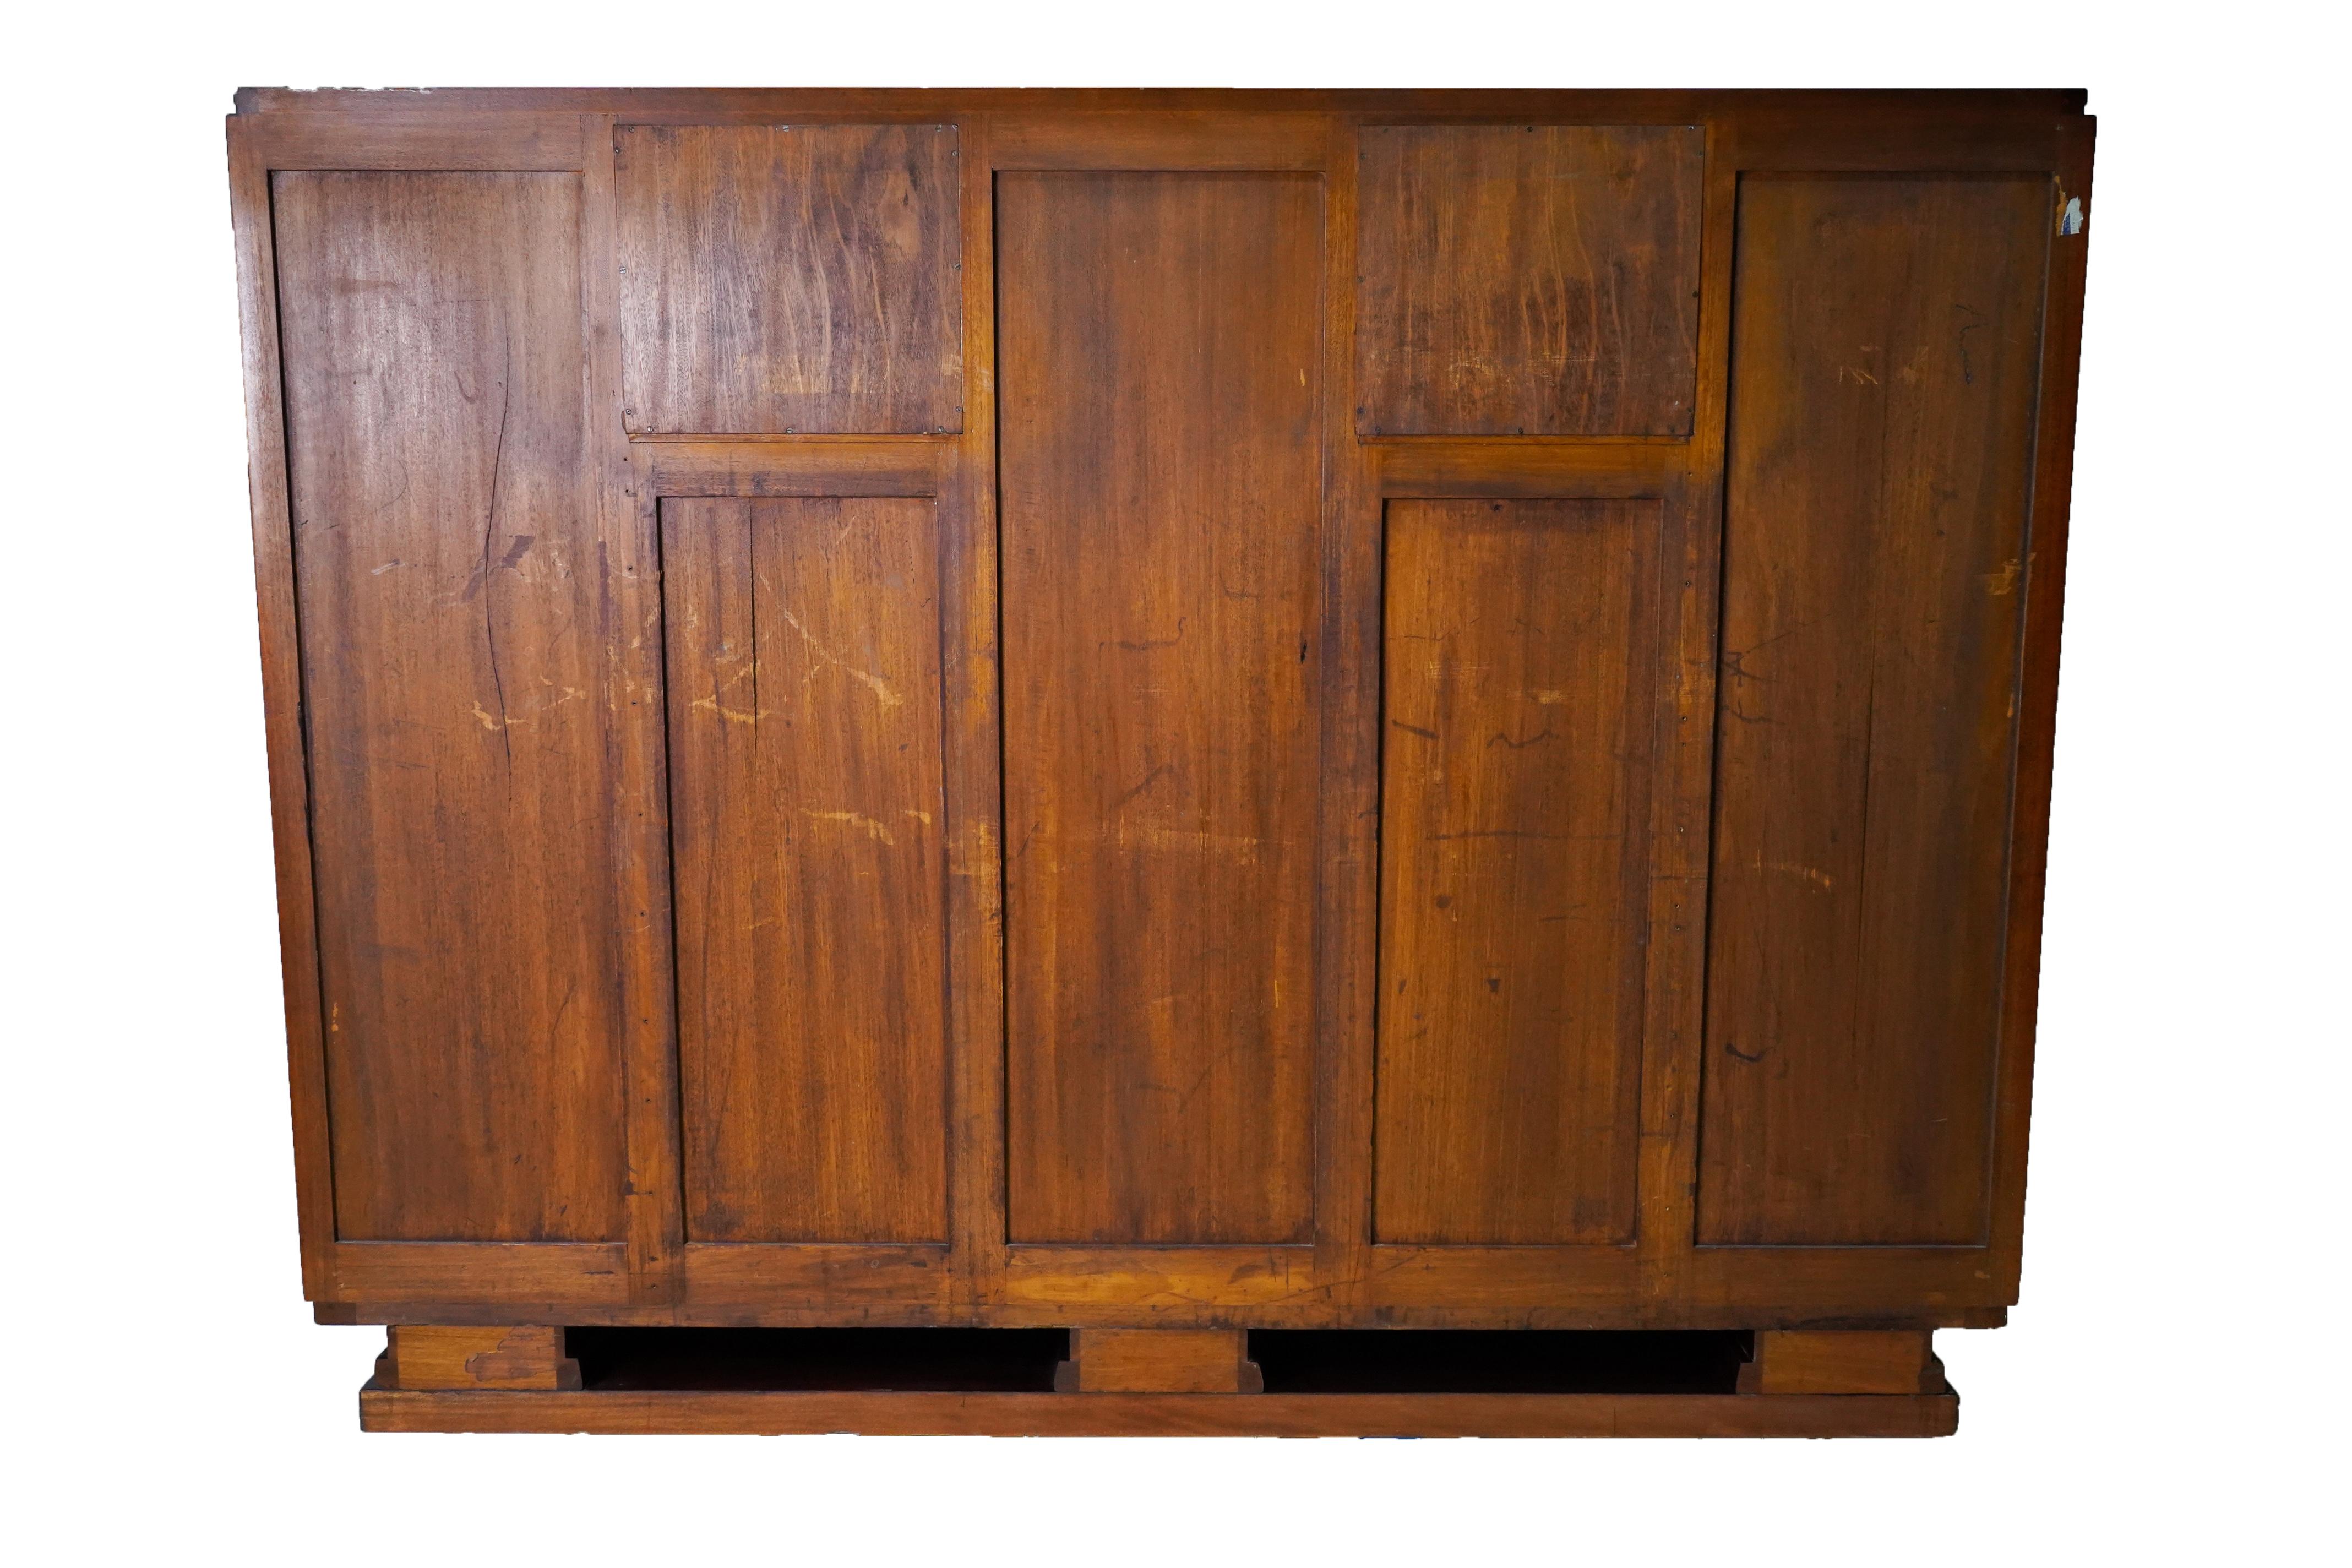 20th Century Vintage French Art Deco Display Cabinet From Rosewood Veneer For Sale